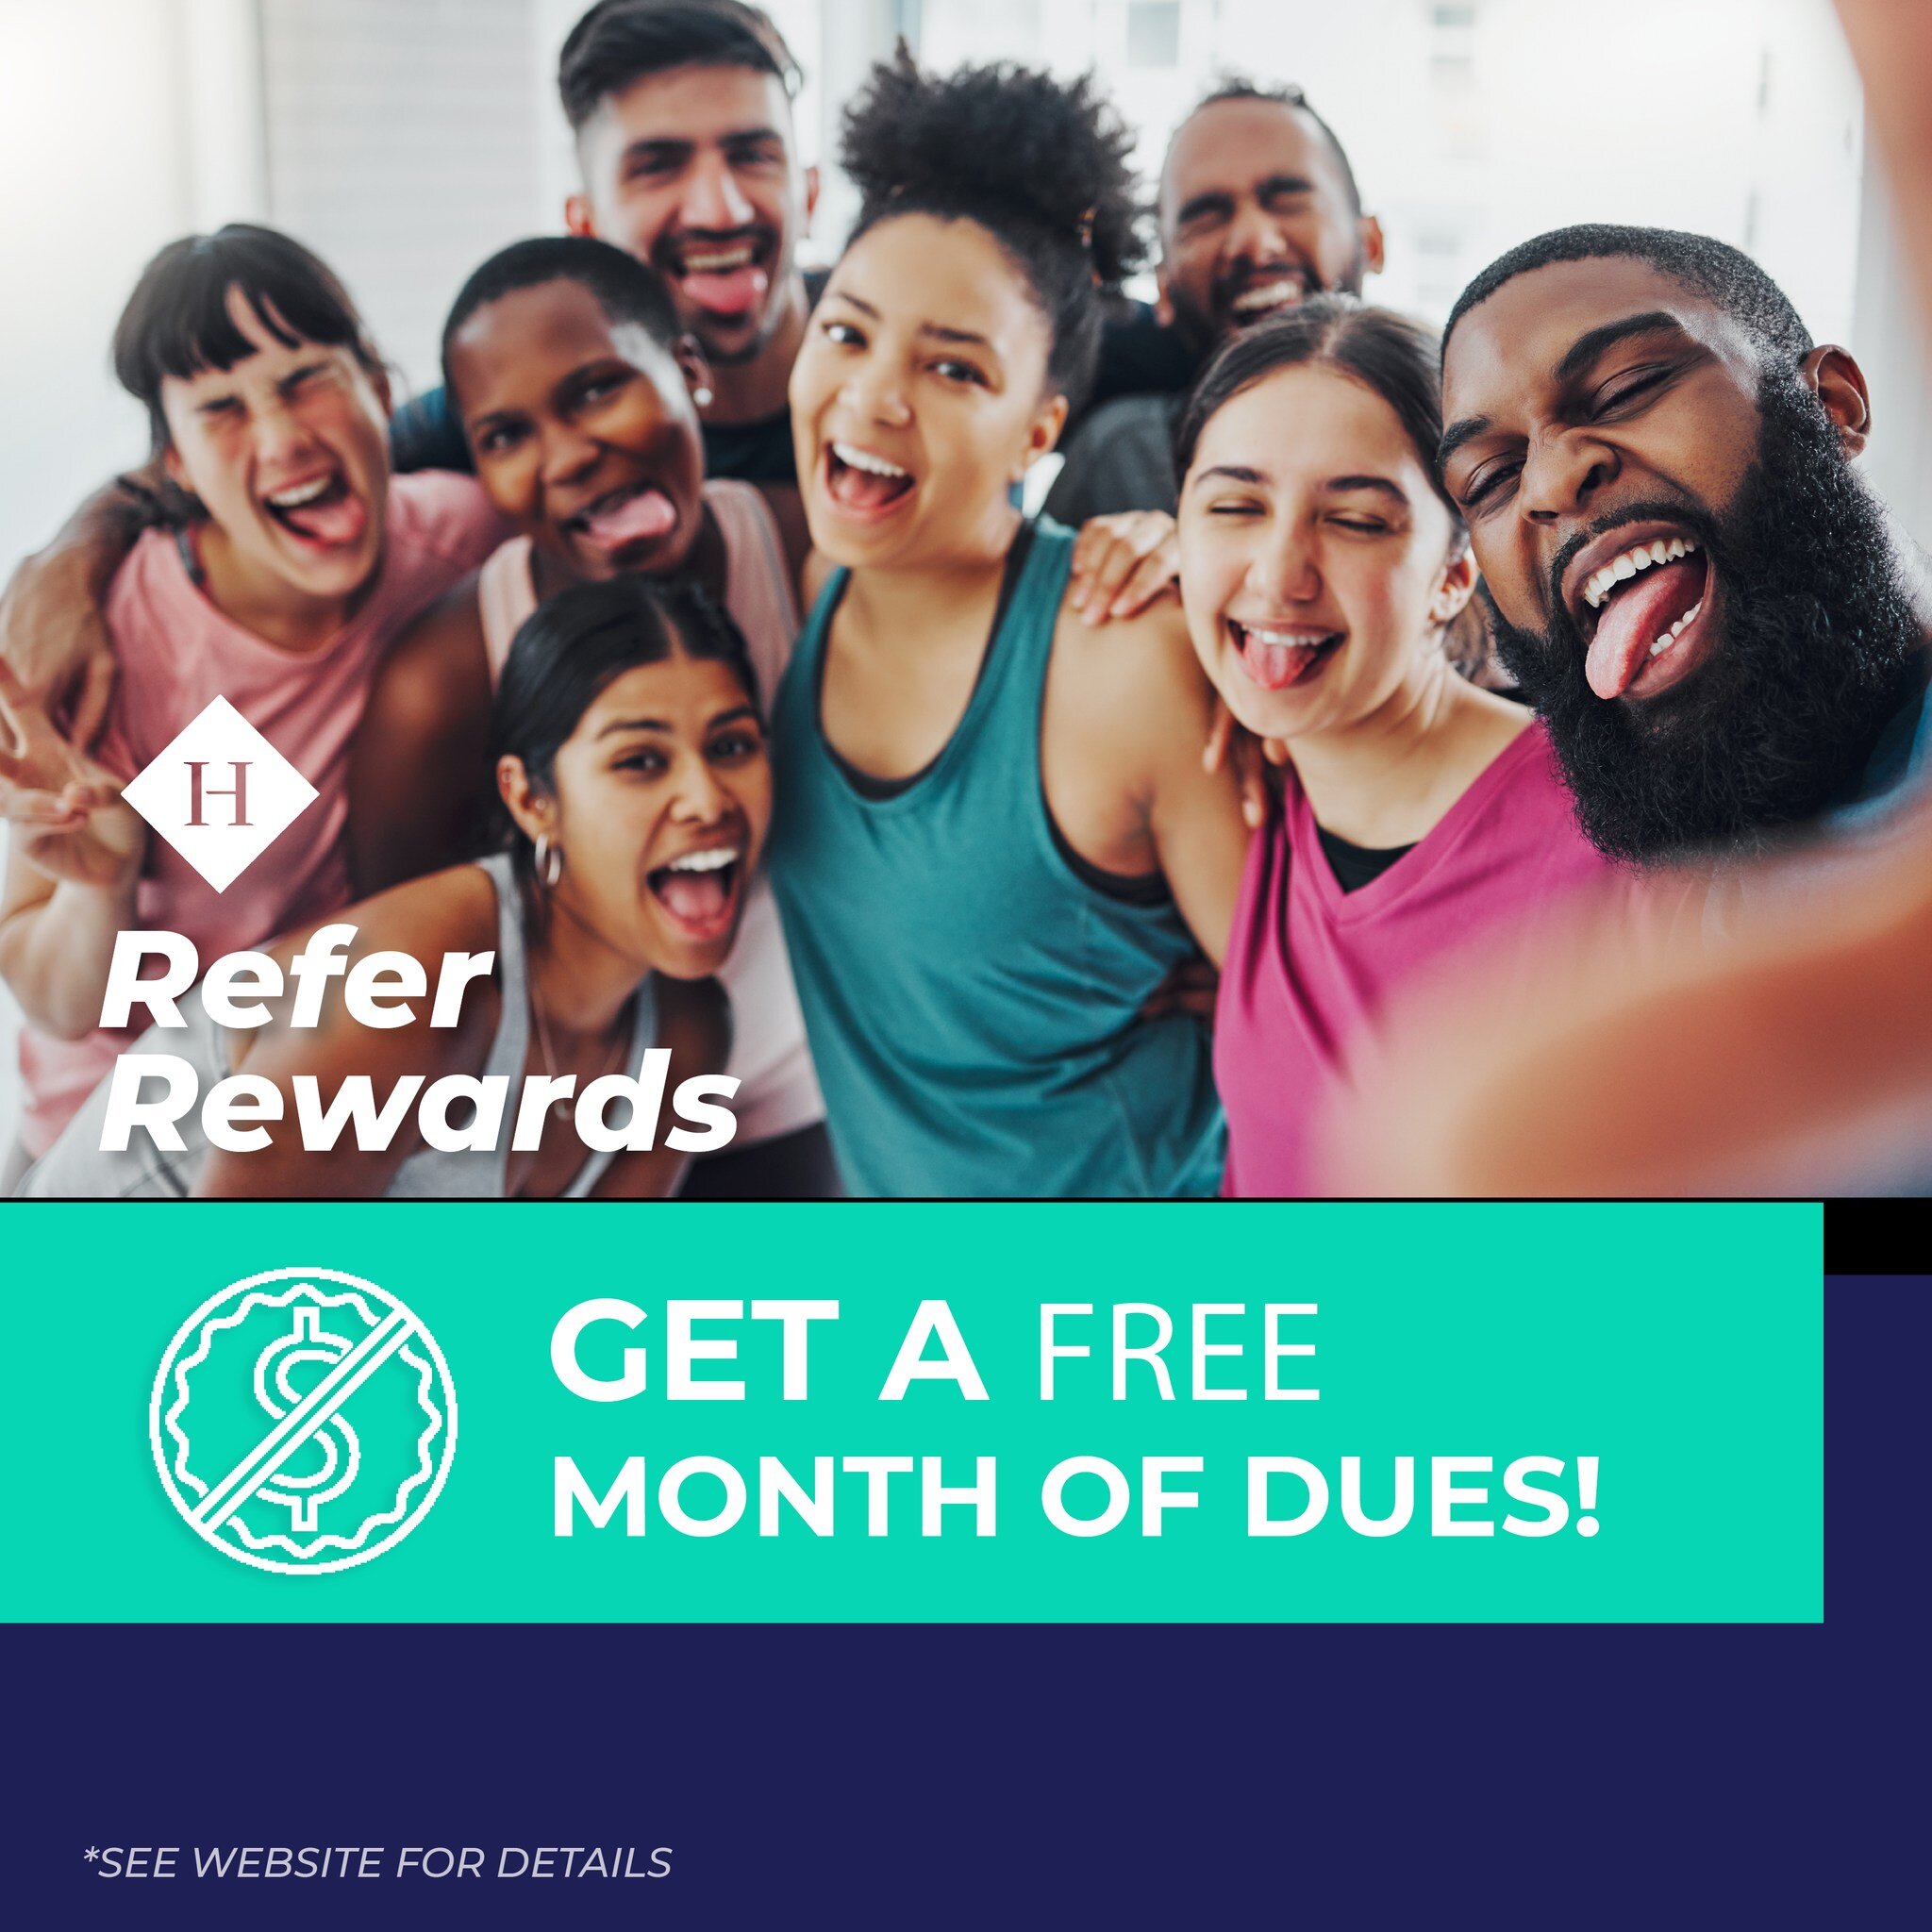 Want to know the secret to staying motivated? Friends!  Refer a friend that joins this month, YOU get a FREE Month of Dues! https://www.healthtrax.com/refer-rewards-may-2023

*See website for details.